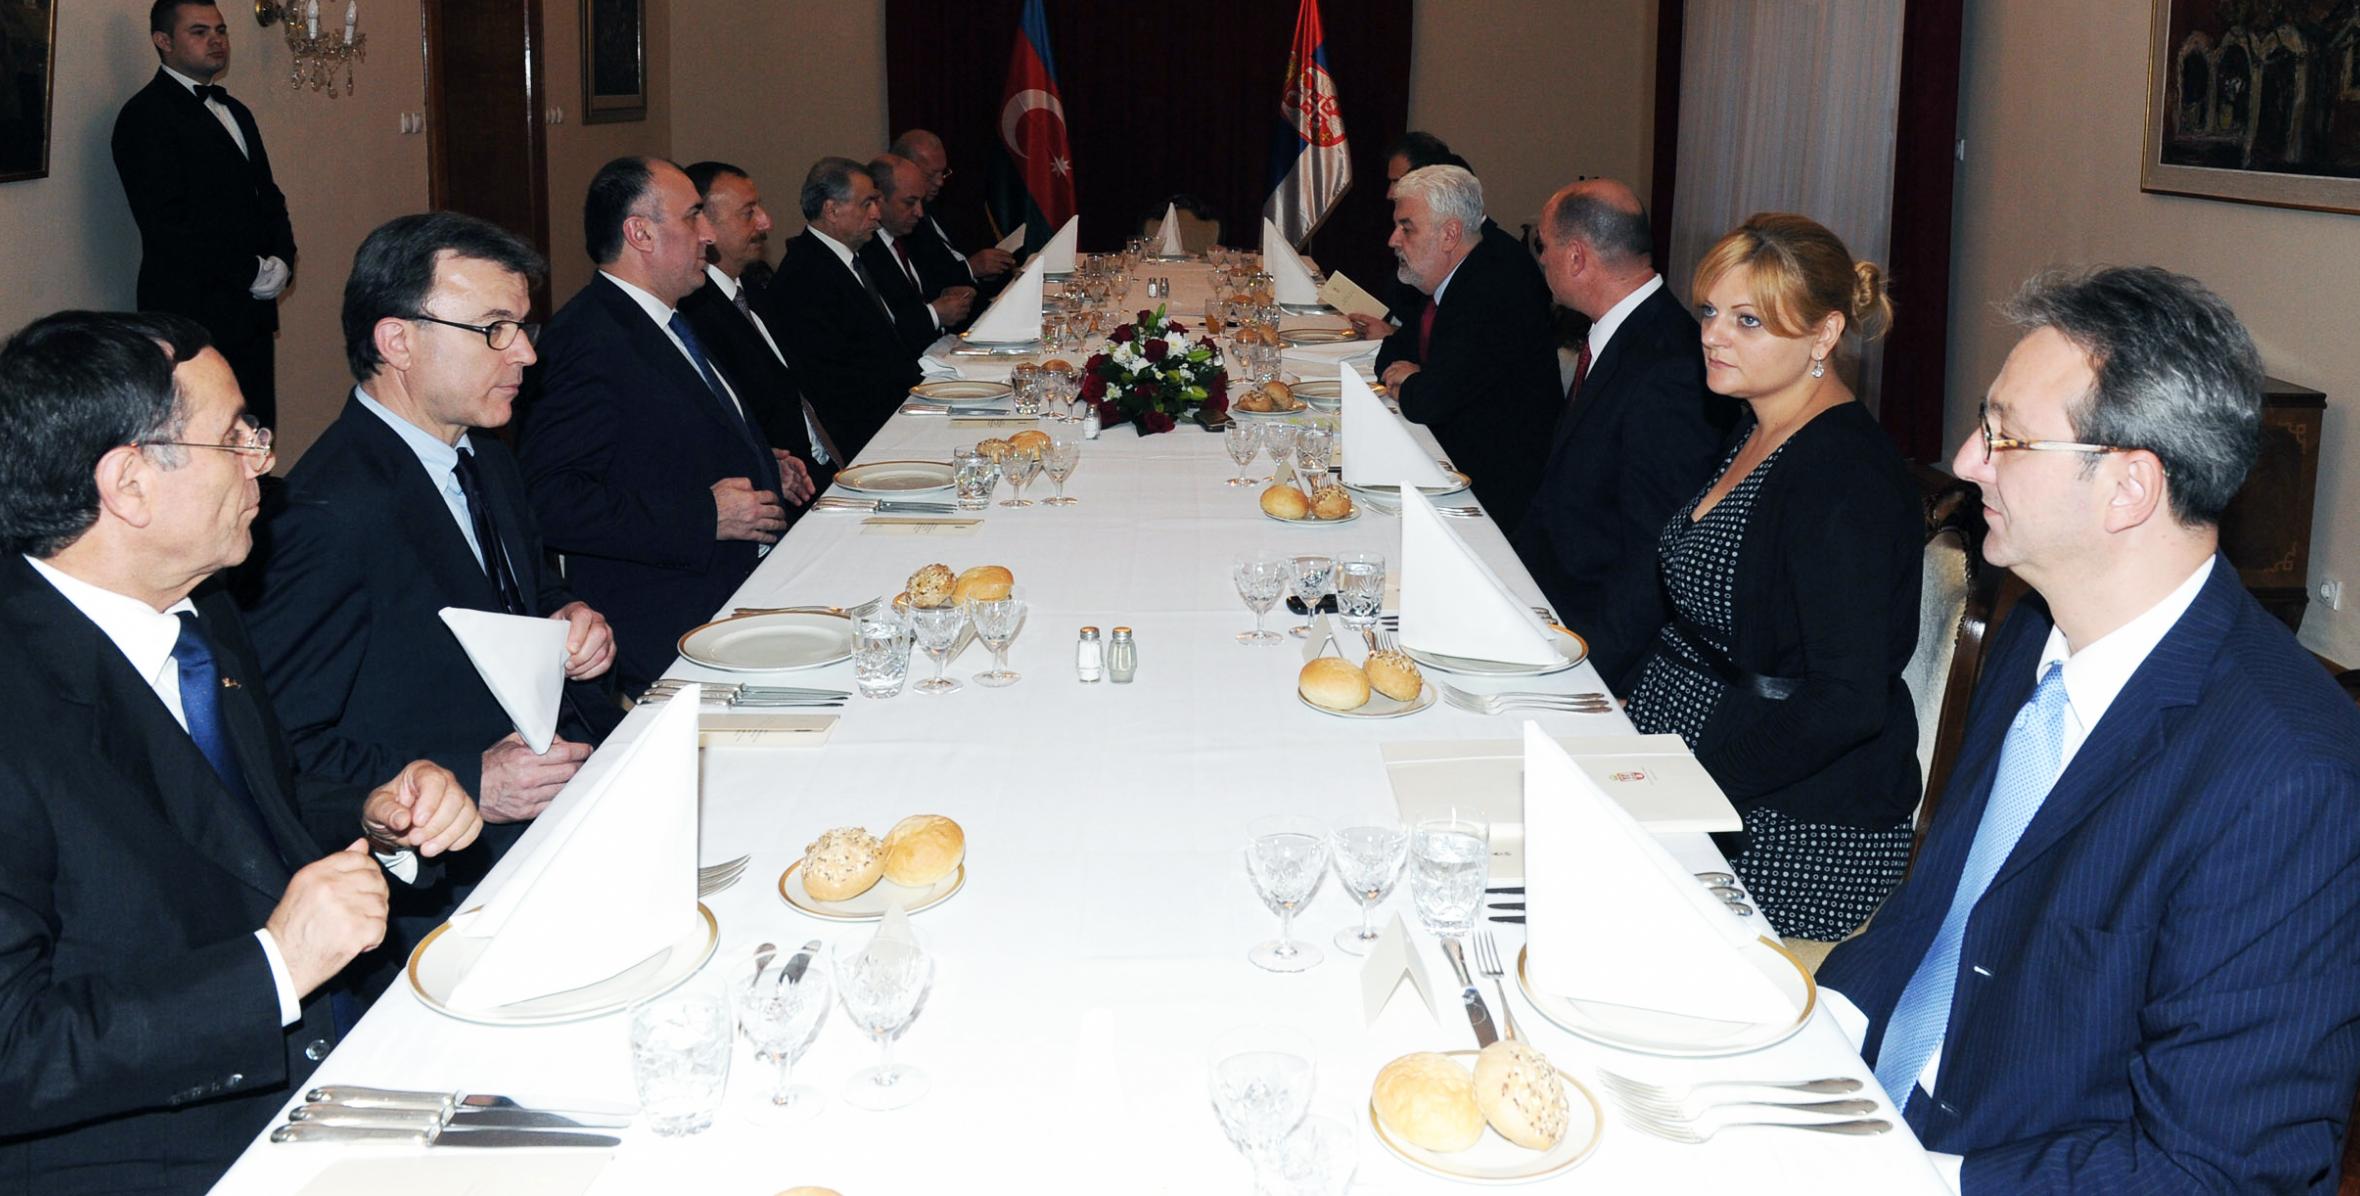 Luncheon was given on behalf of Serbian Prime Minister Mirko Cvetkovic in honor of Ilham Aliyev